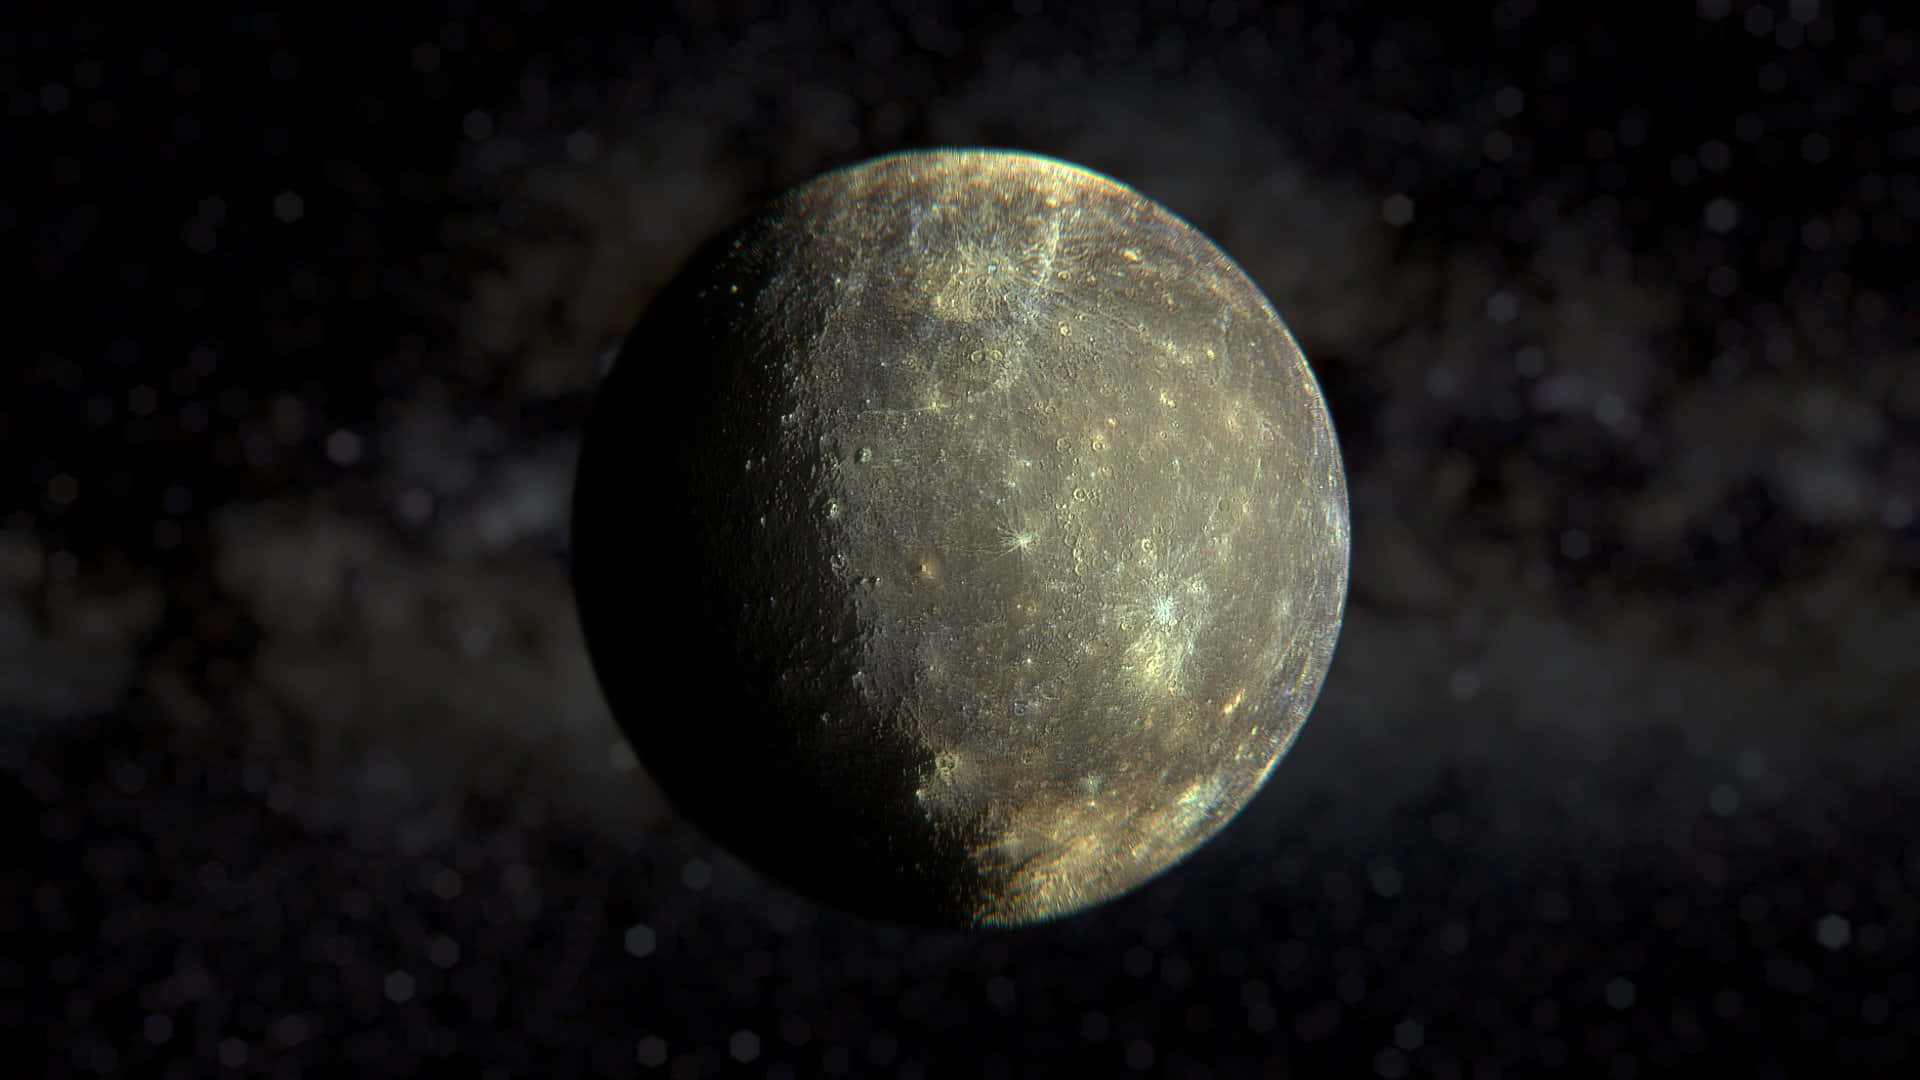 The Planet Mercury - Shining in The Solar System